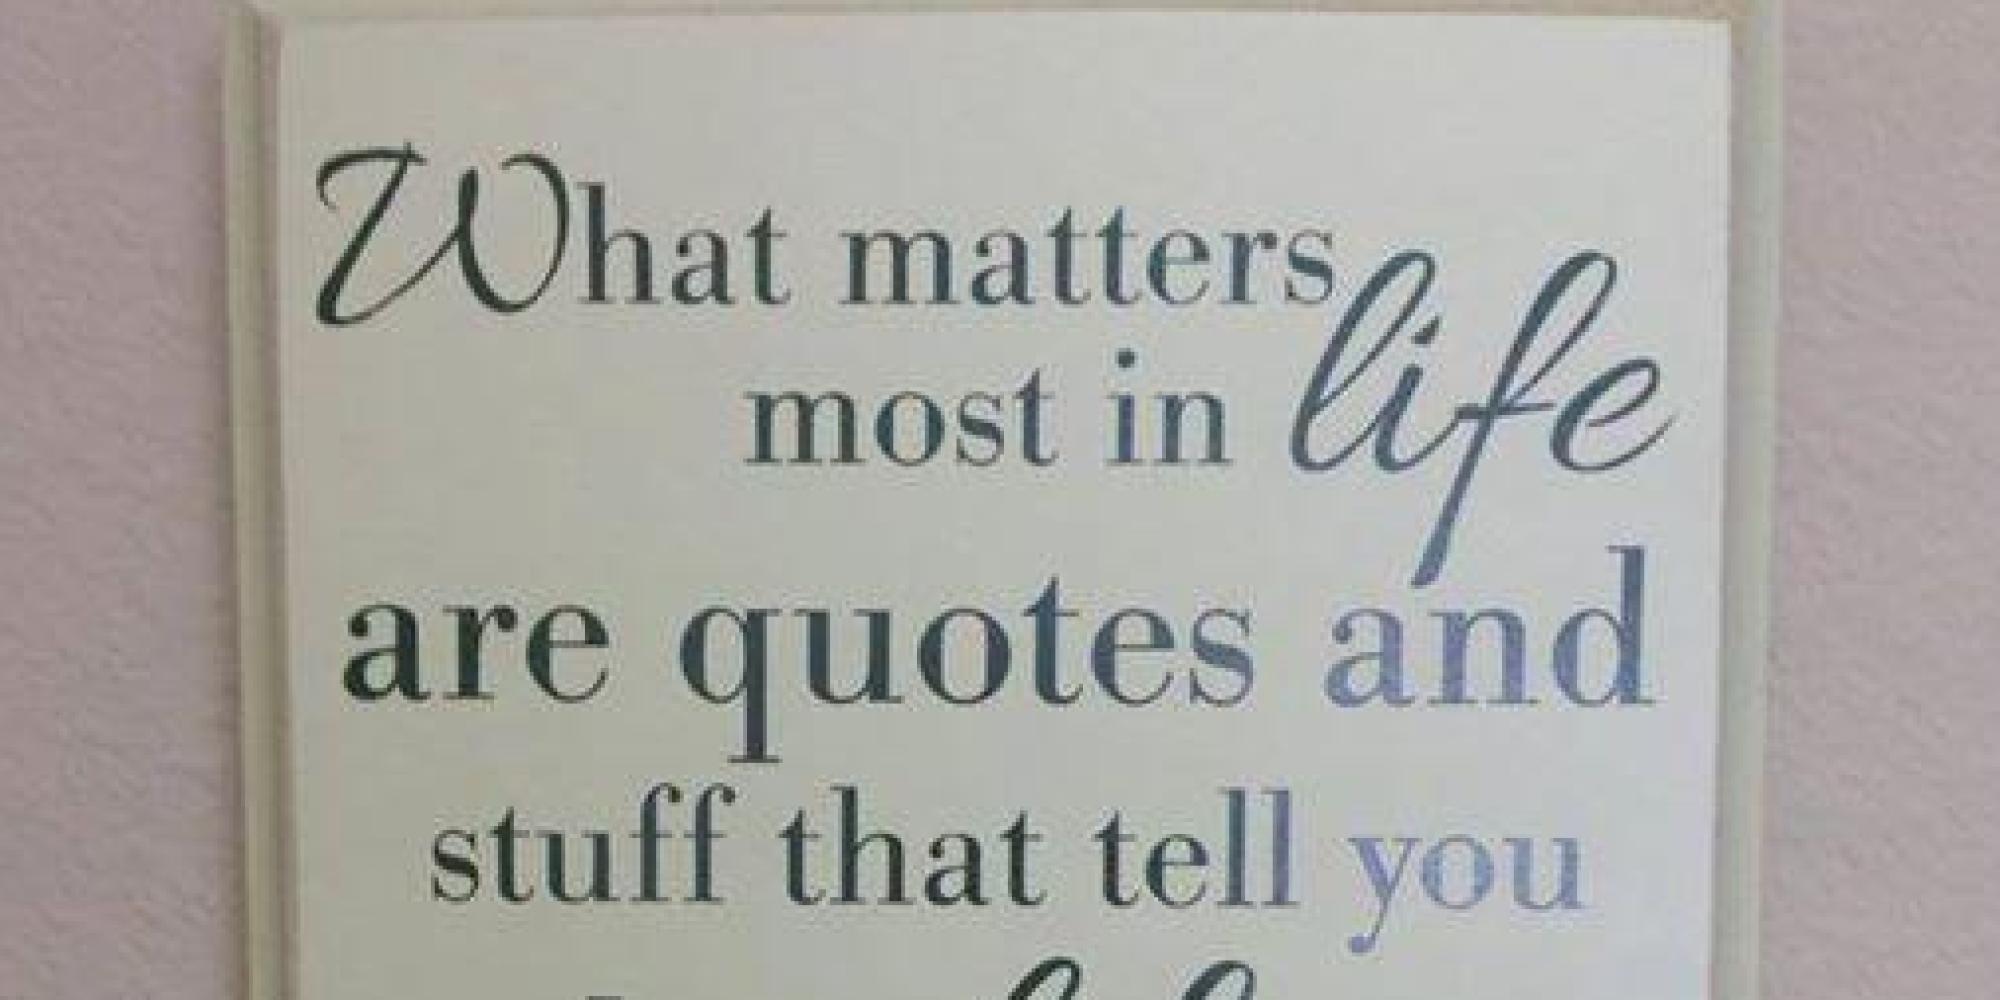 Uplifting Quotes About Life Funny. QuotesGram